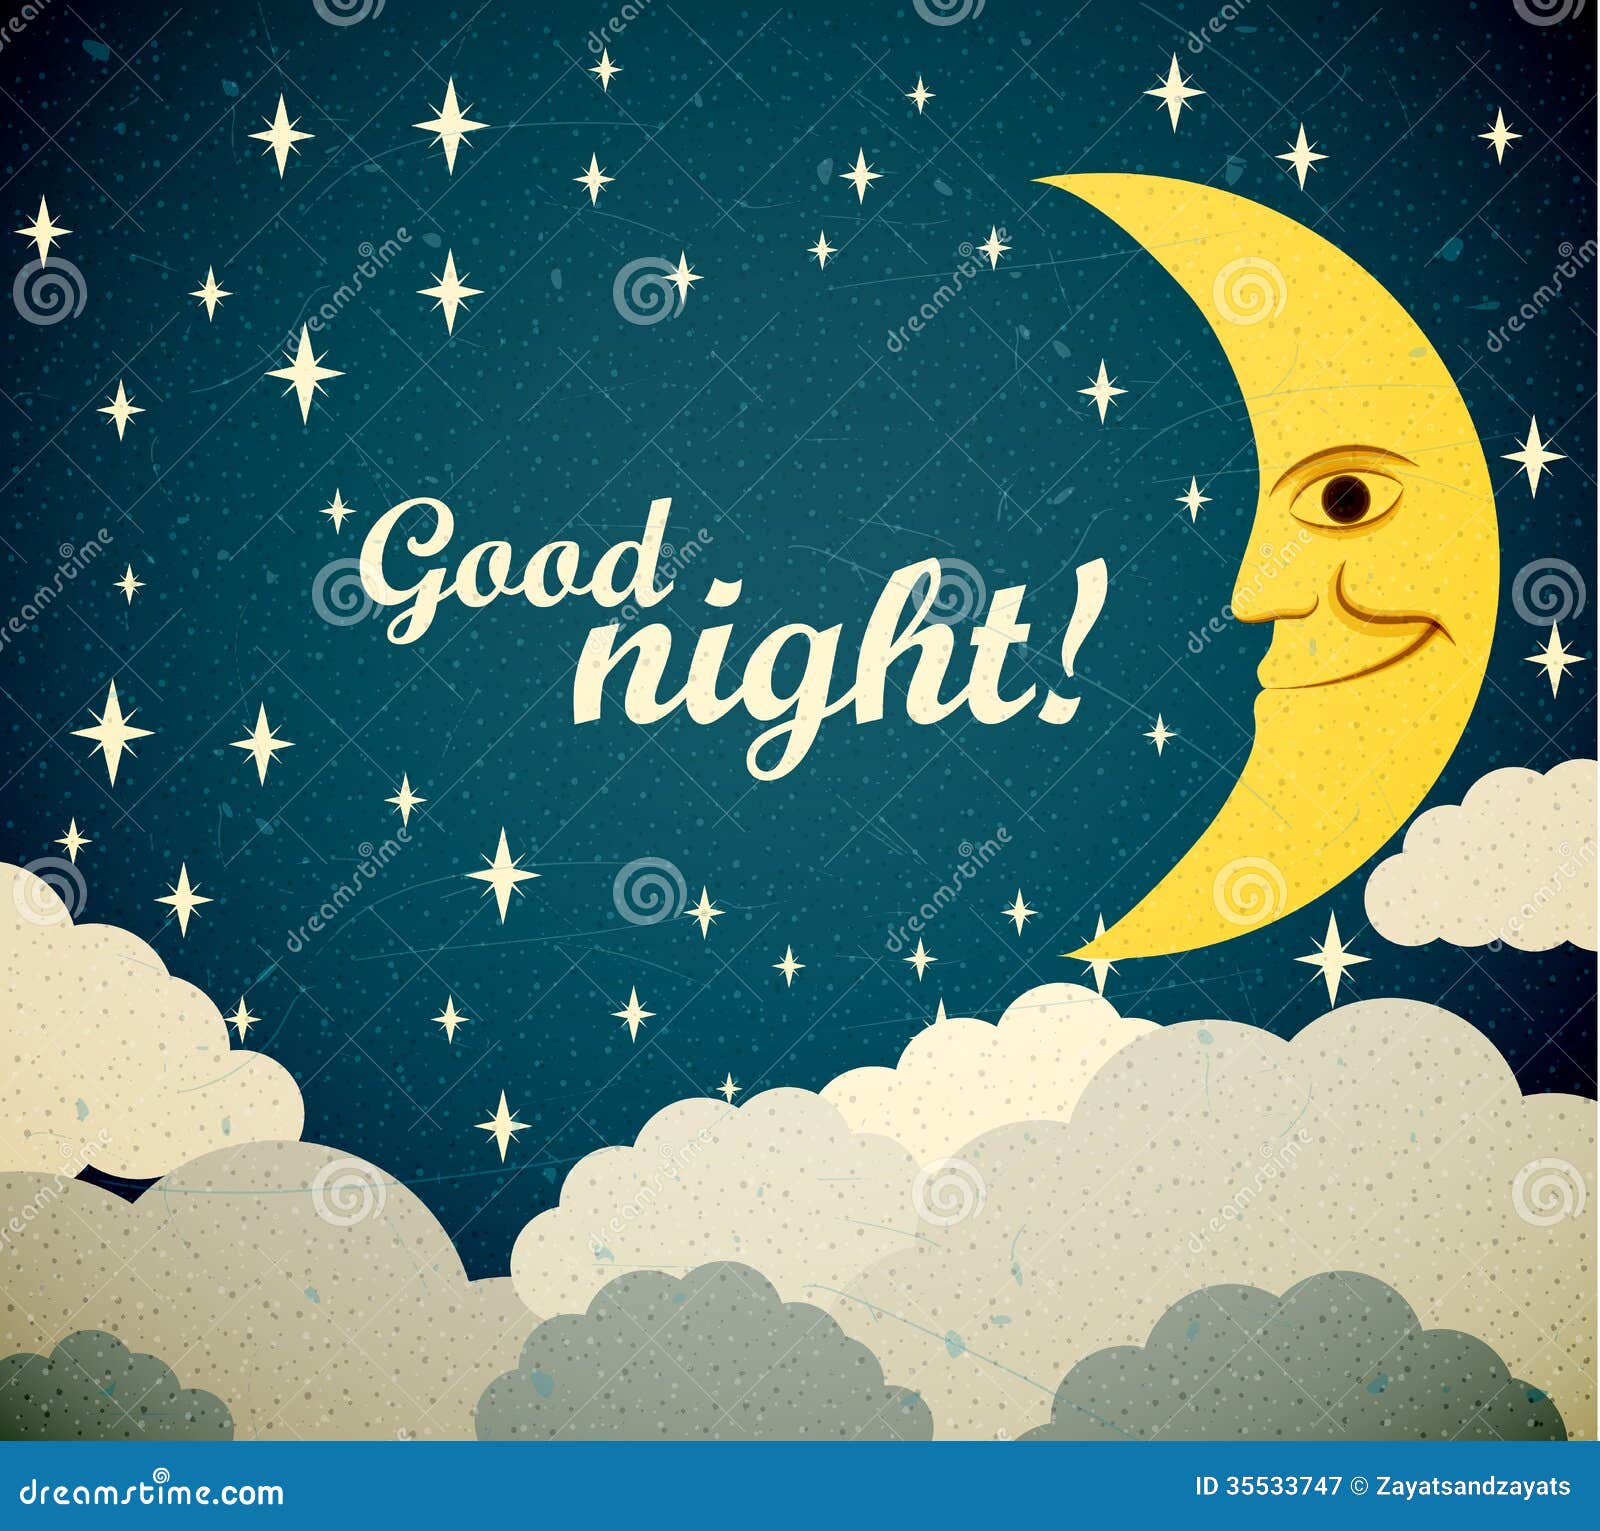 good night clipart images - photo #22